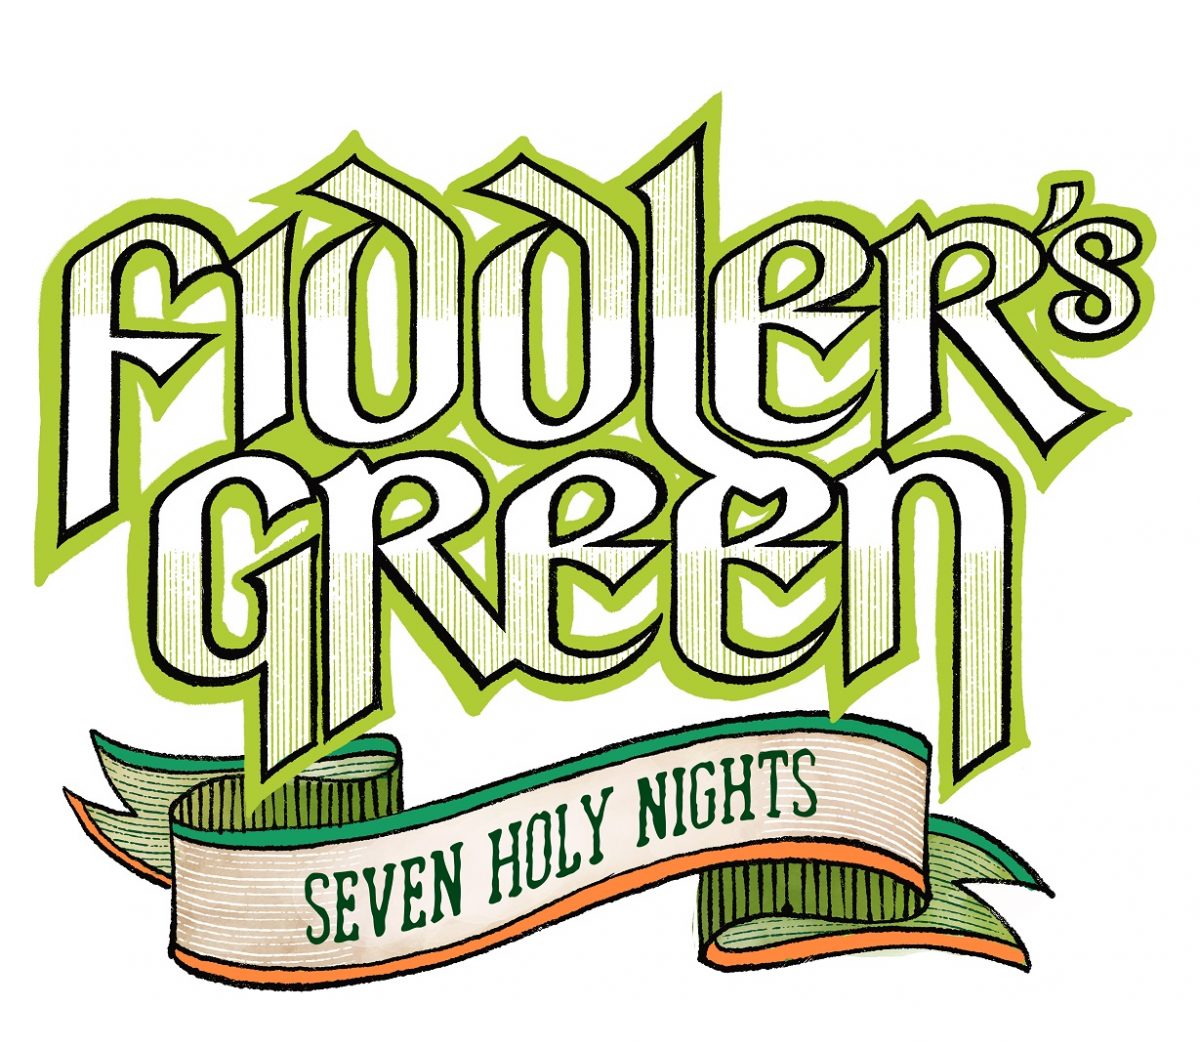 Fiddlers Green „Seven Holy Nights“